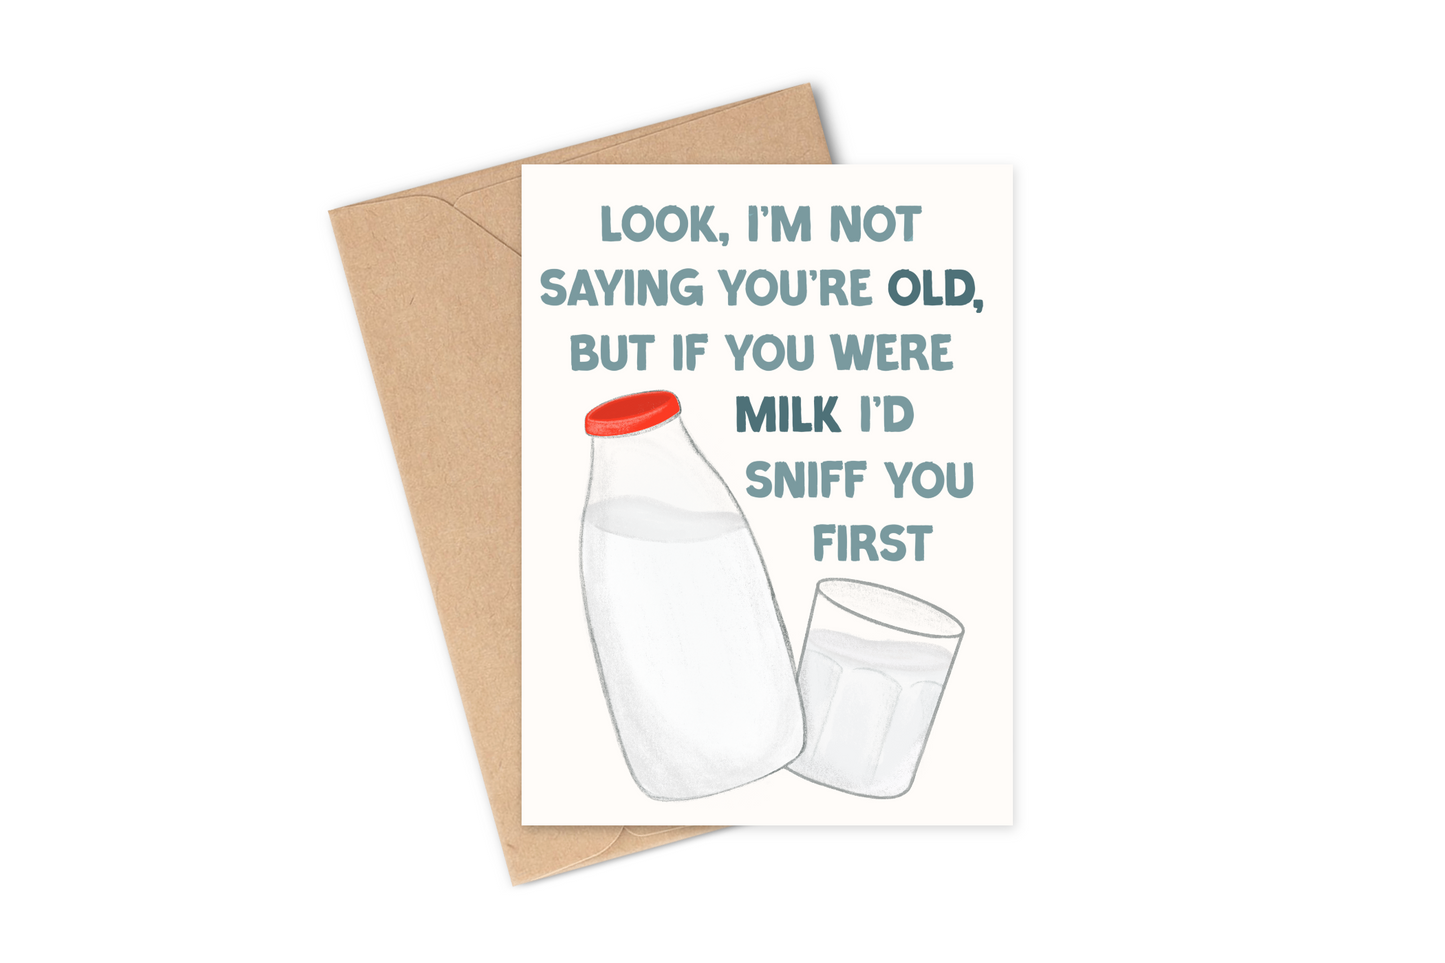 sarcastic old age joke greeting card for grandma, grandpa, mom, dad, sister brother, coworker, boss. This funny bday greeting card says "Look, I'm not saying you're old, but if you were milk I'd sniff you first", dry dark humor, milk, hand-illustrated card